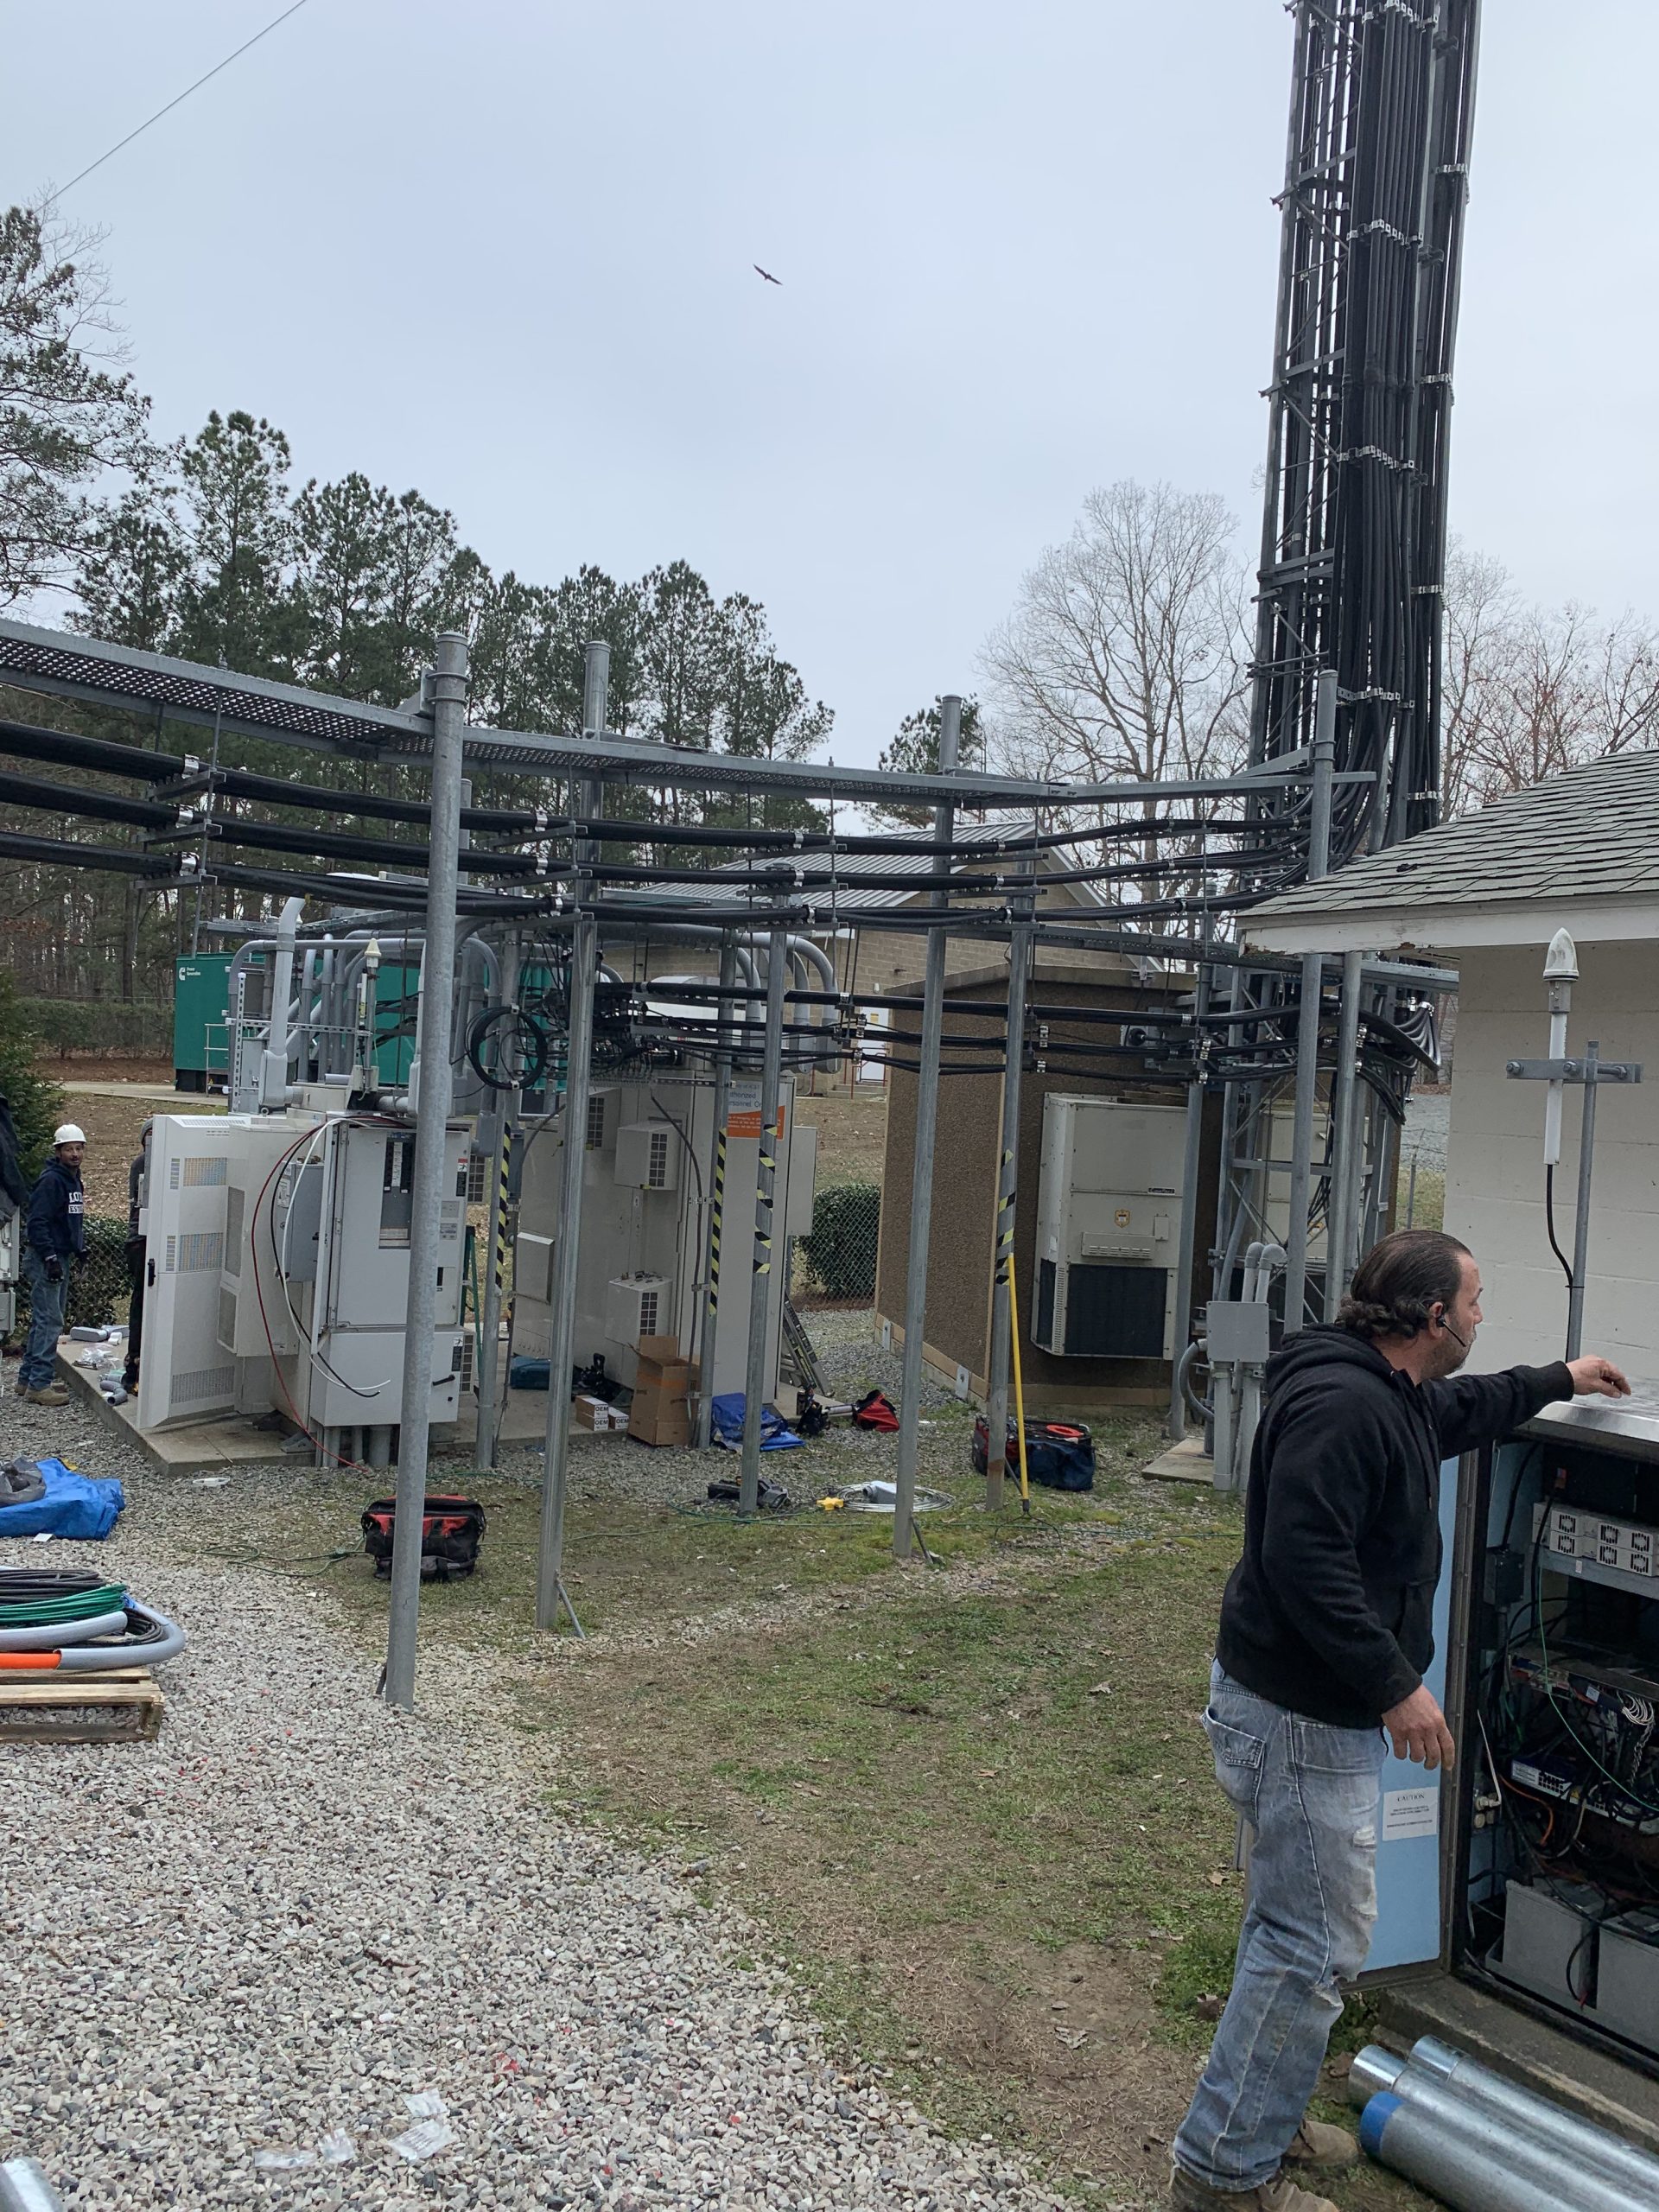 PROJECTS RF USA, Image 2.  View of the facilities and their complexity in the utility locating services for the installation of fiber optic cable (06/03/2019)